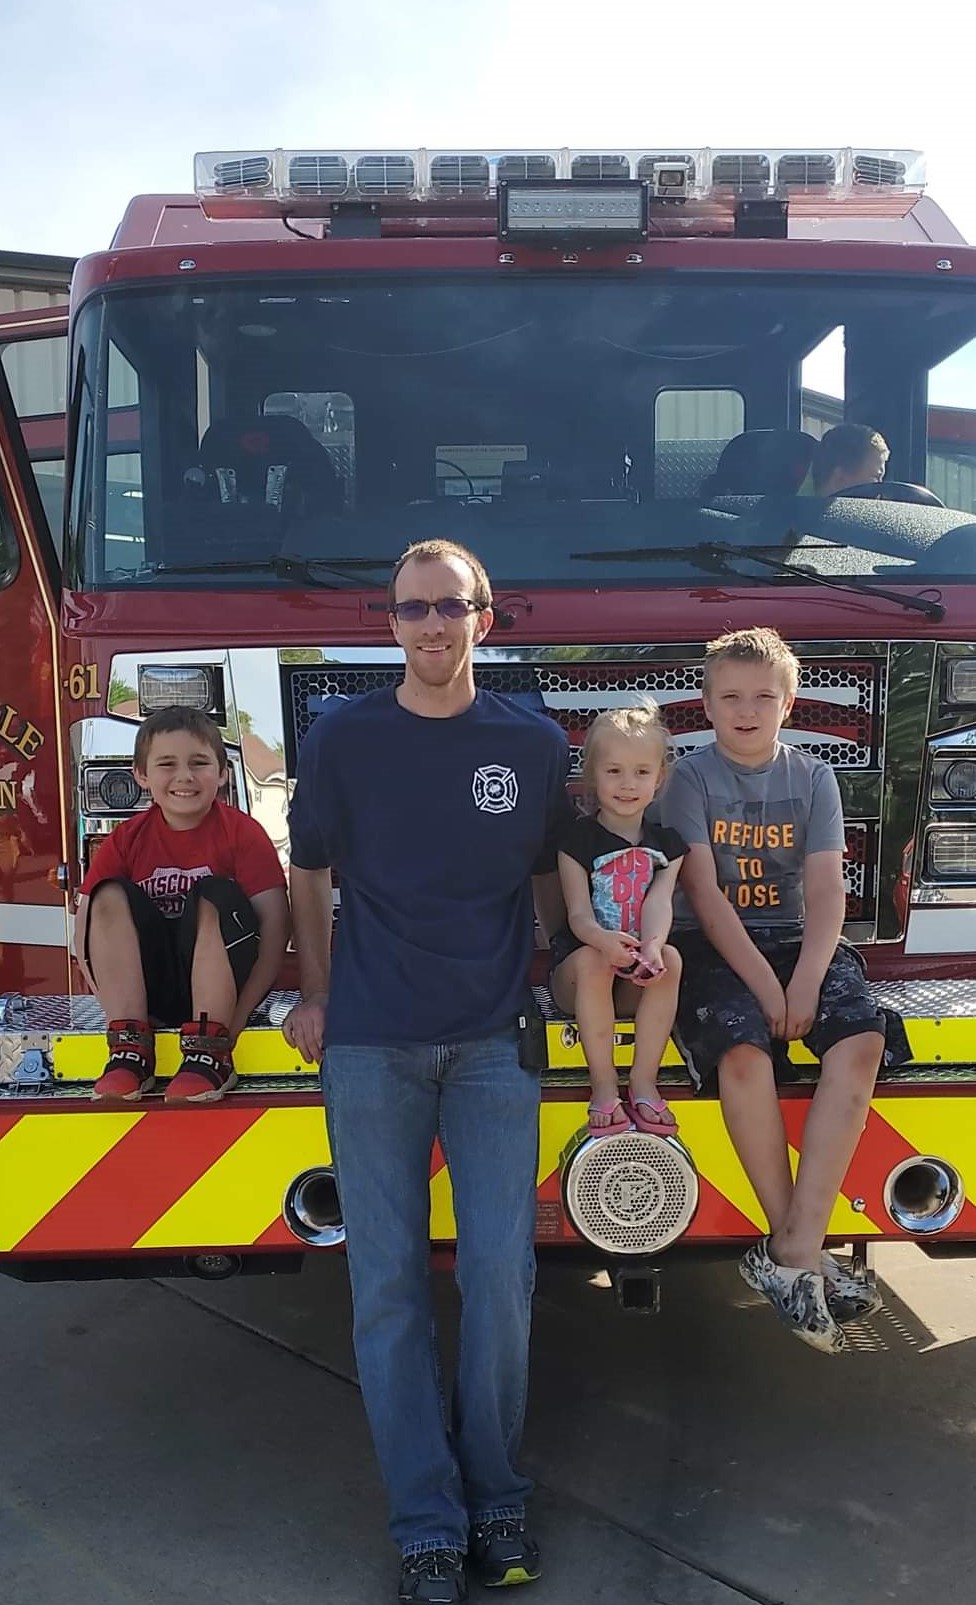 Joe with his Niece and Nephews during a visit to the fire station during their annual pancake breakfast